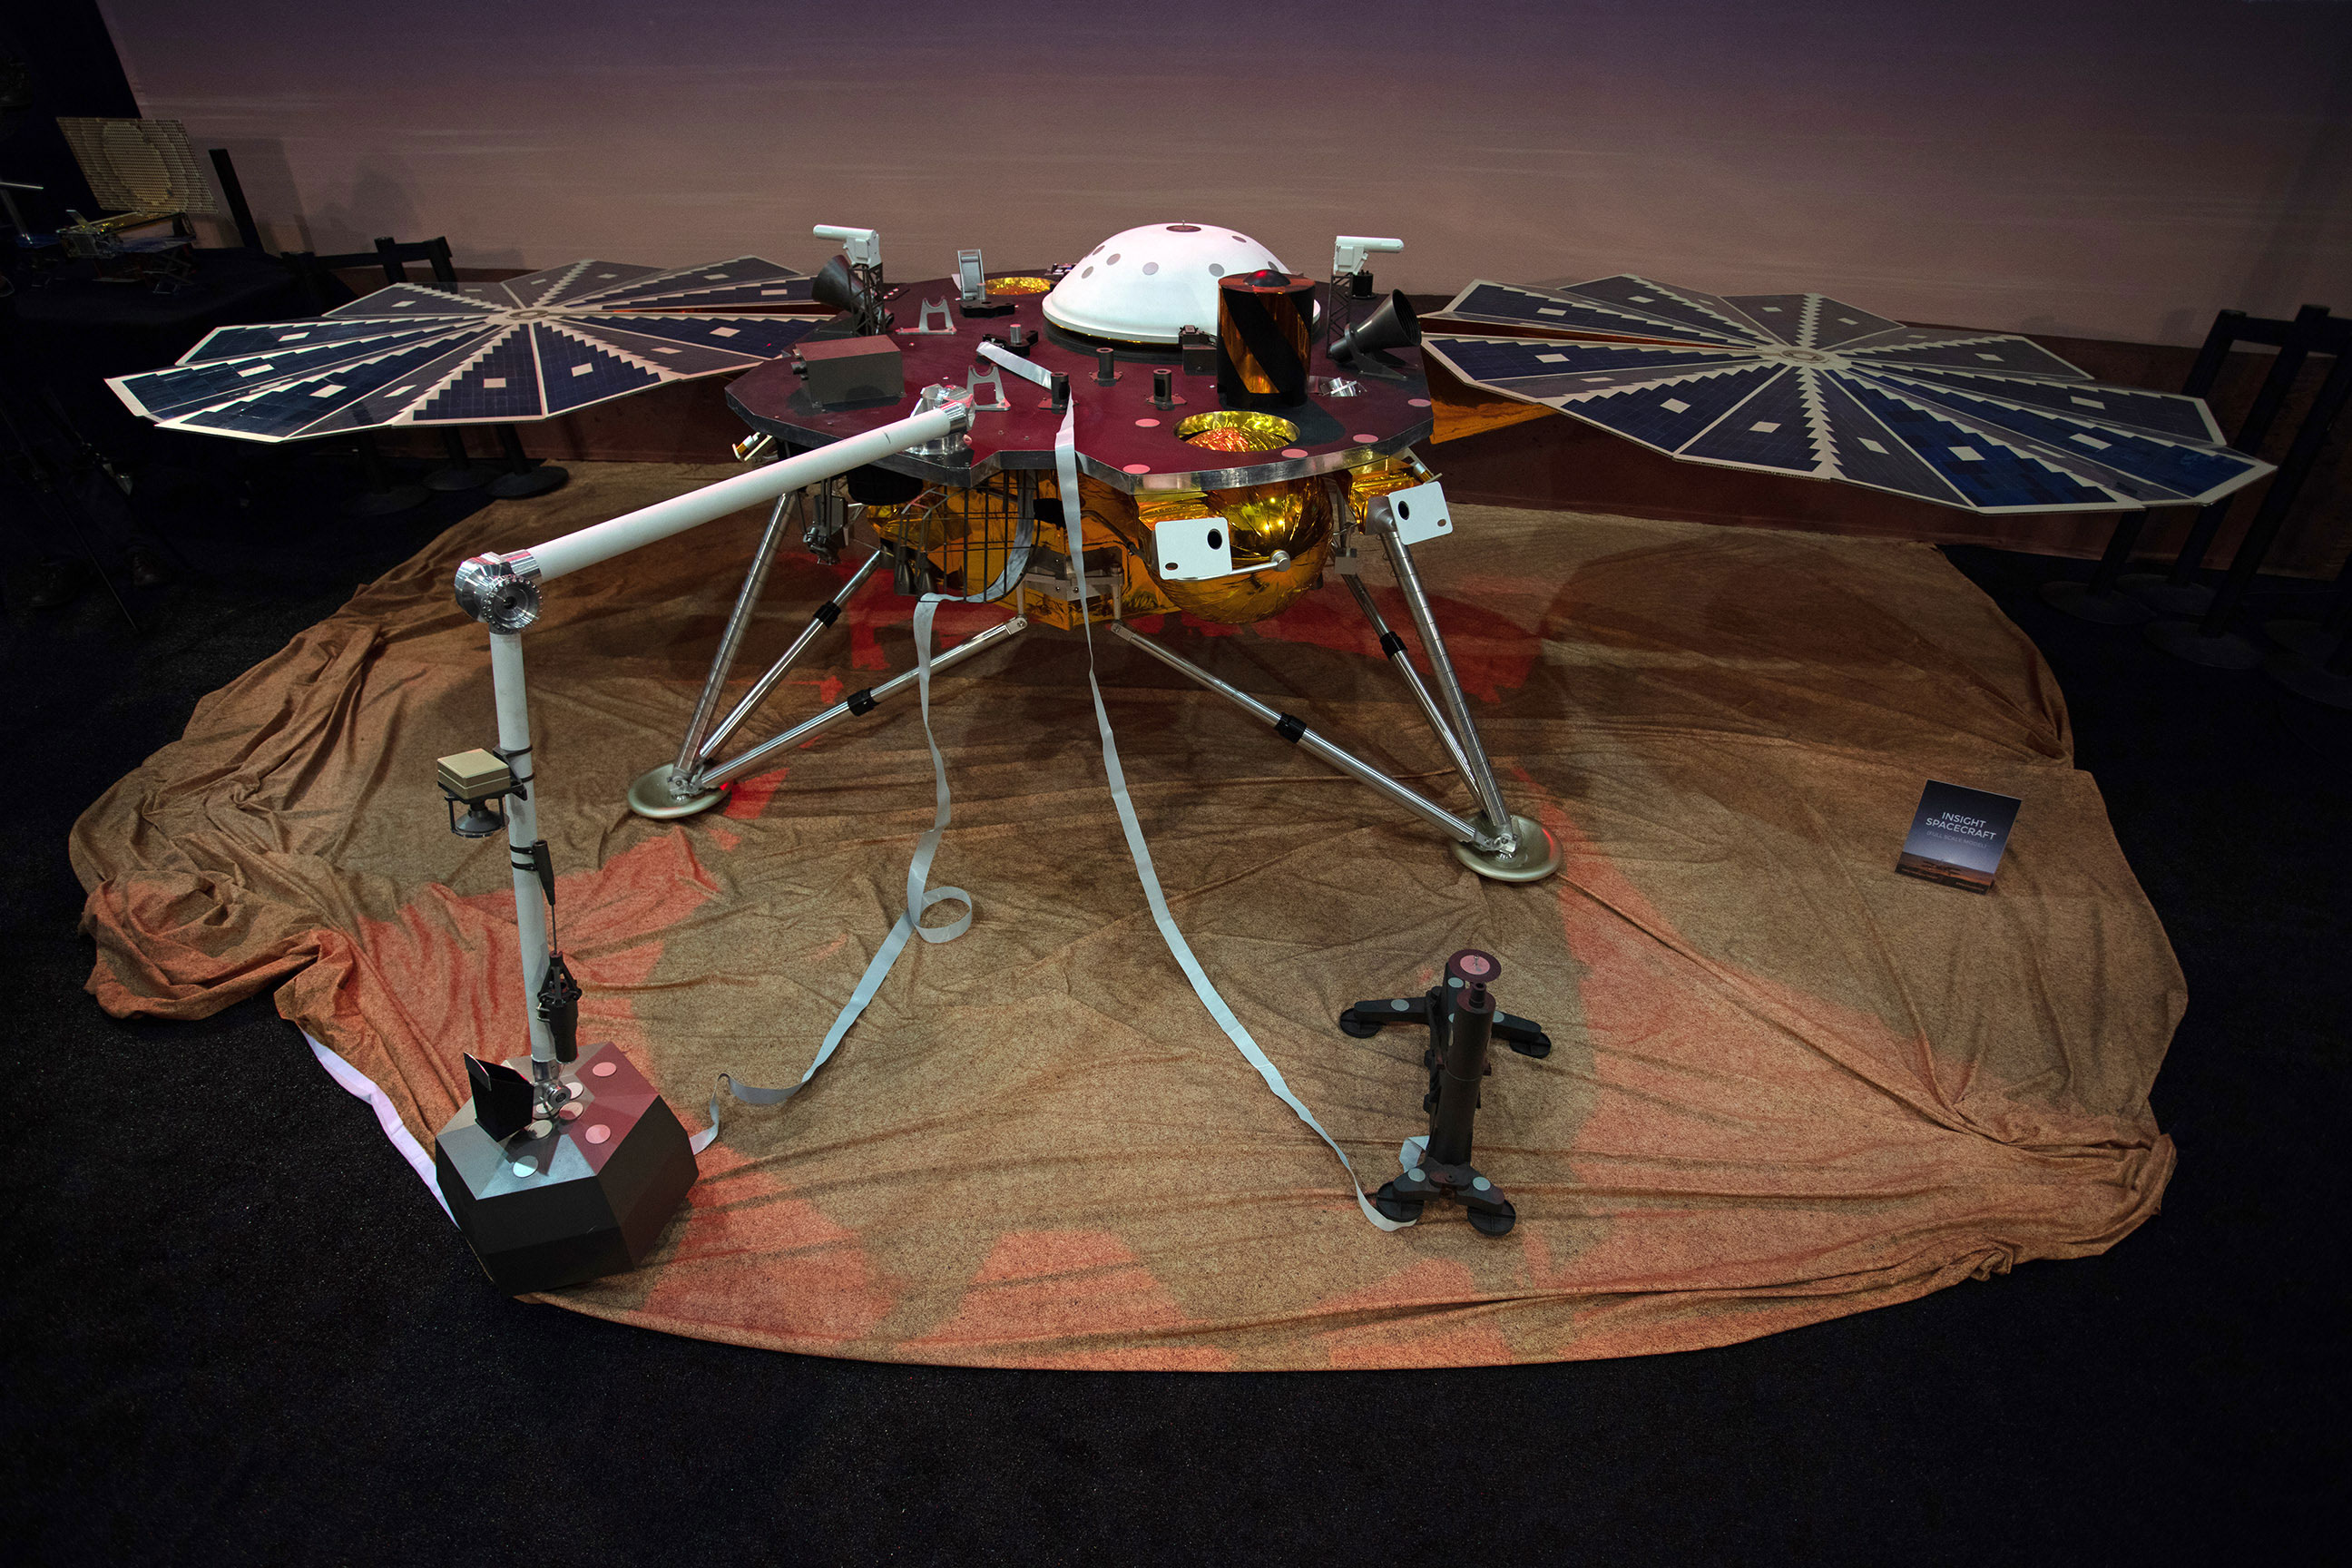 With deployed solar arrays, InSight is 19 feet wide (6 meters), just over 3 feet tall (~1 meter), and weighs only 790 pounds (358 kilograms).  This is a full-scale model of lander.  Photo: Jon Brack